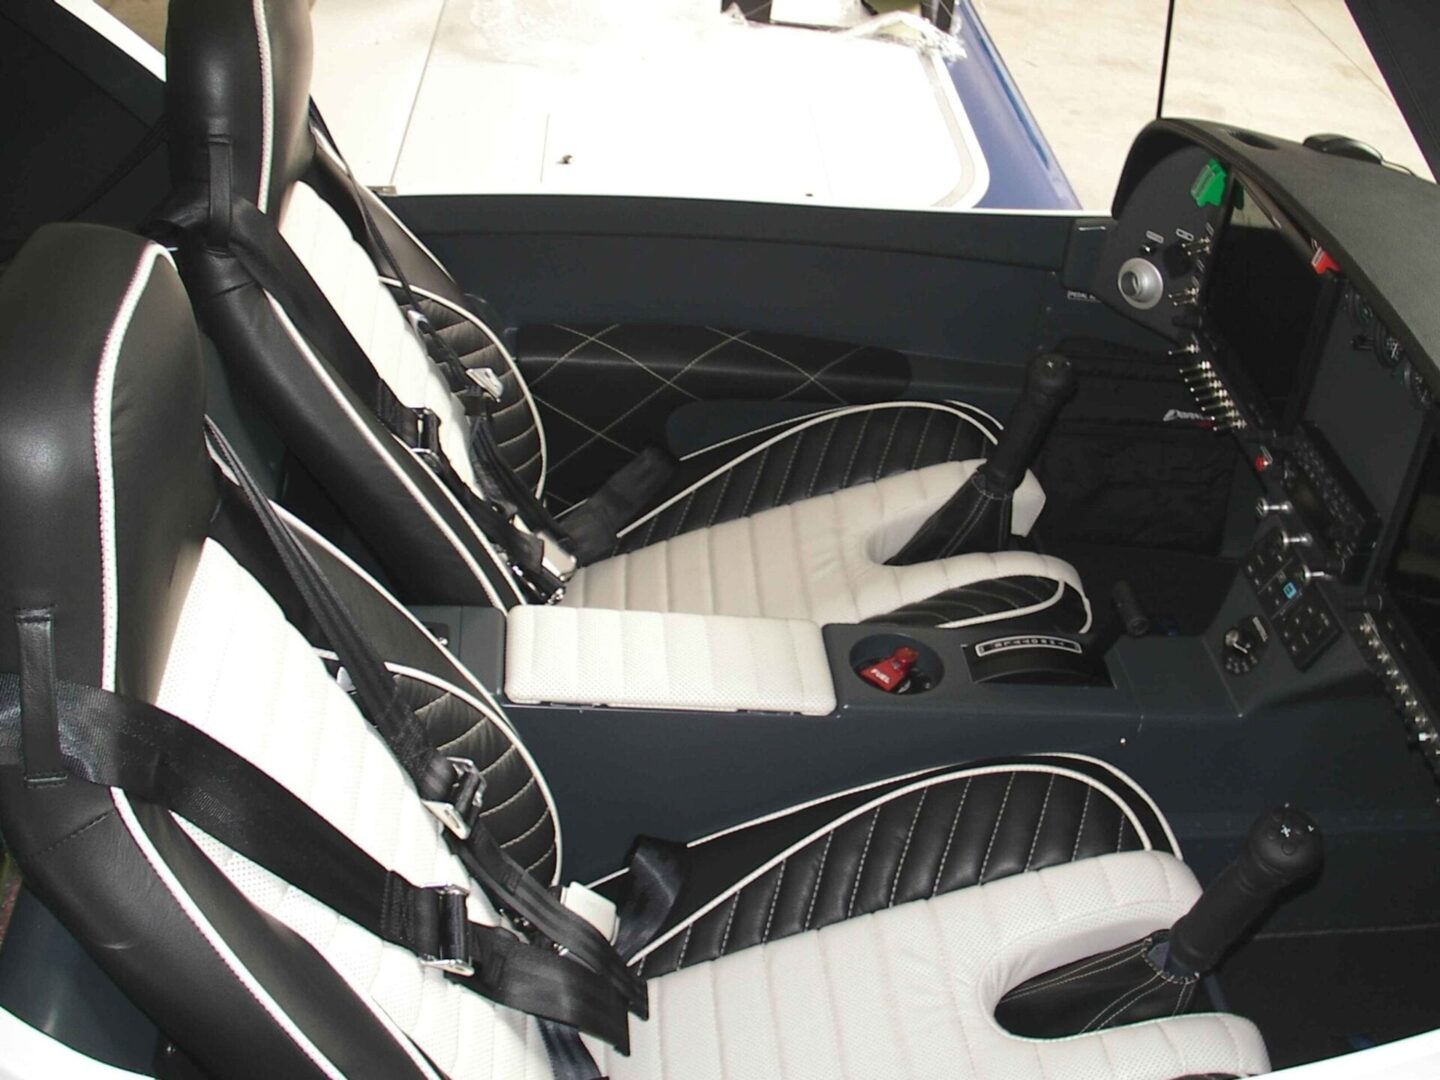 A close up of the seats in a car